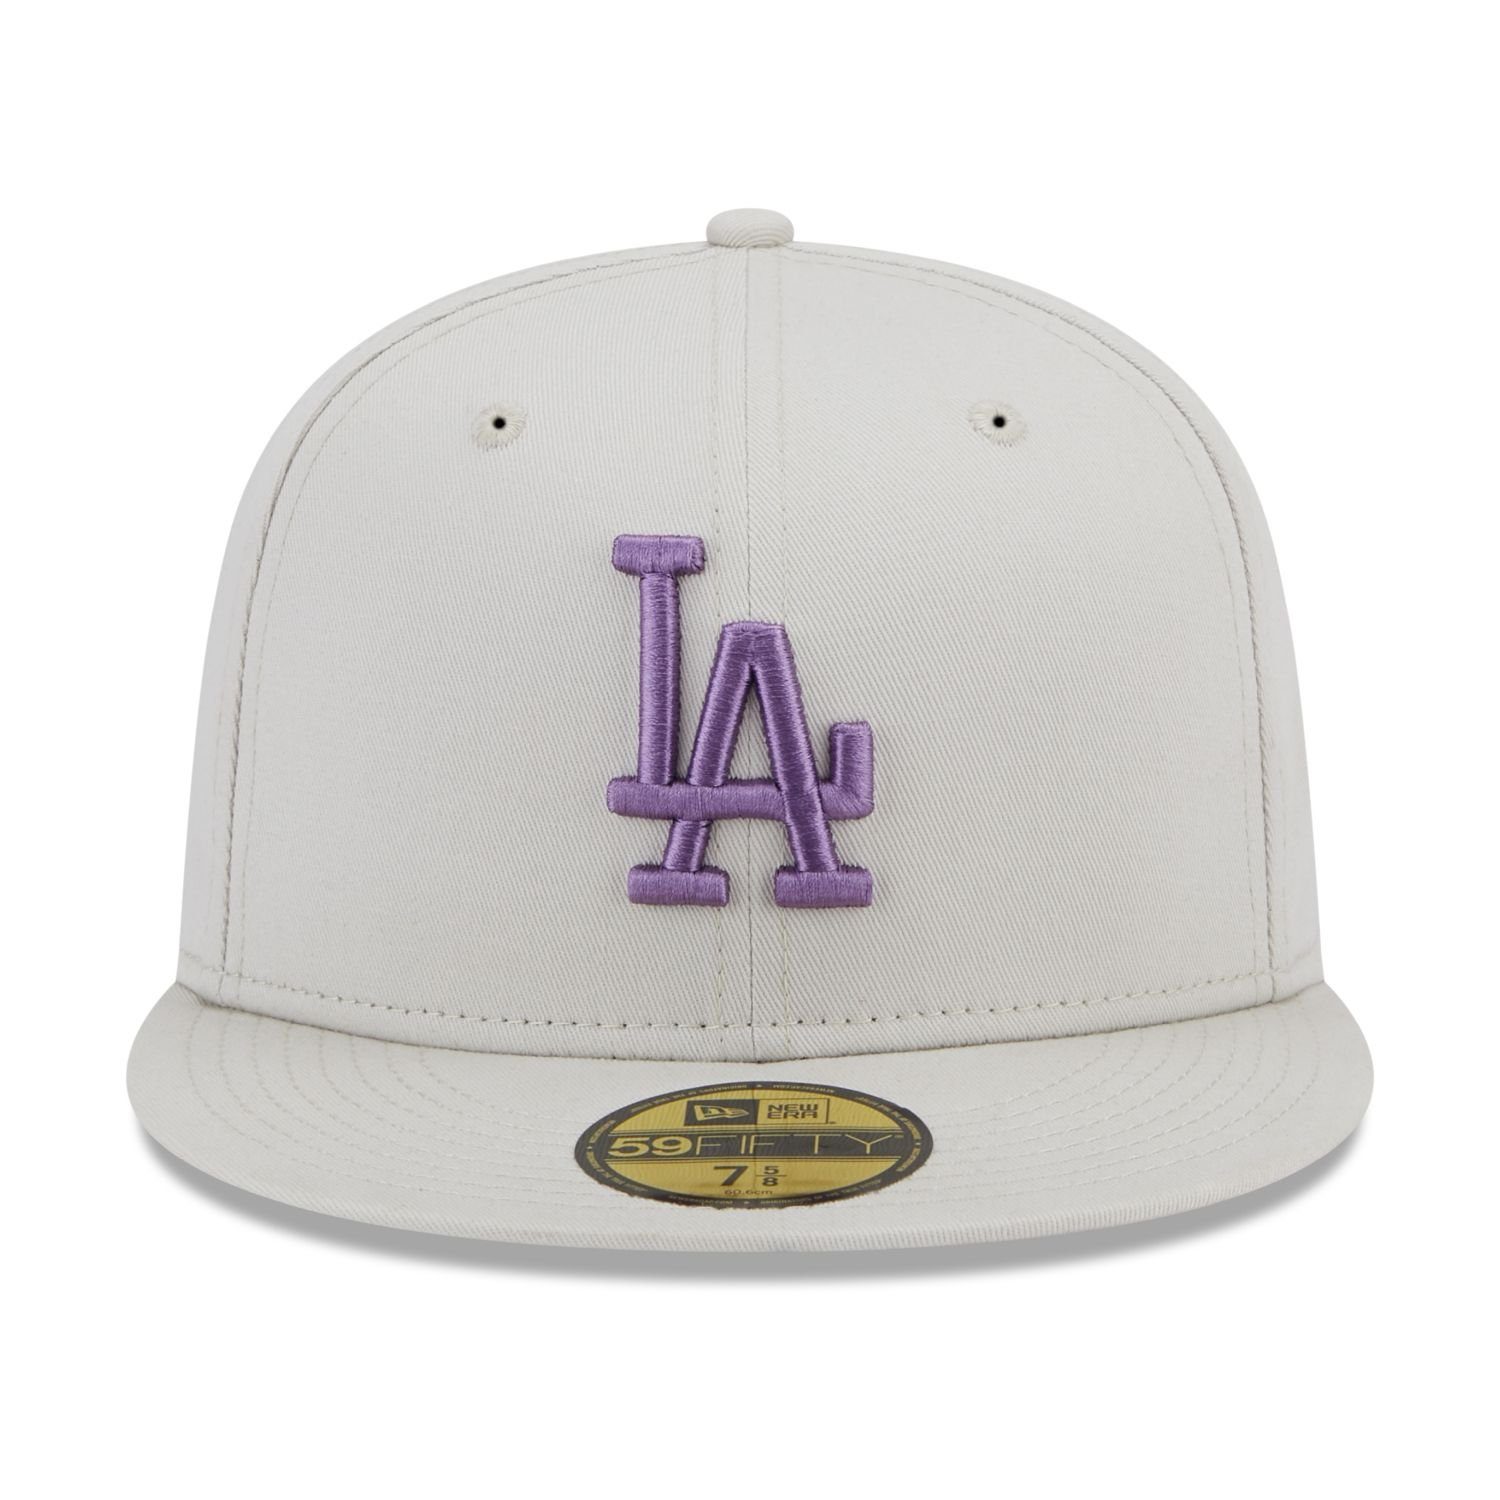 Fitted New Cap Era 59Fifty Los Dodgers Angeles